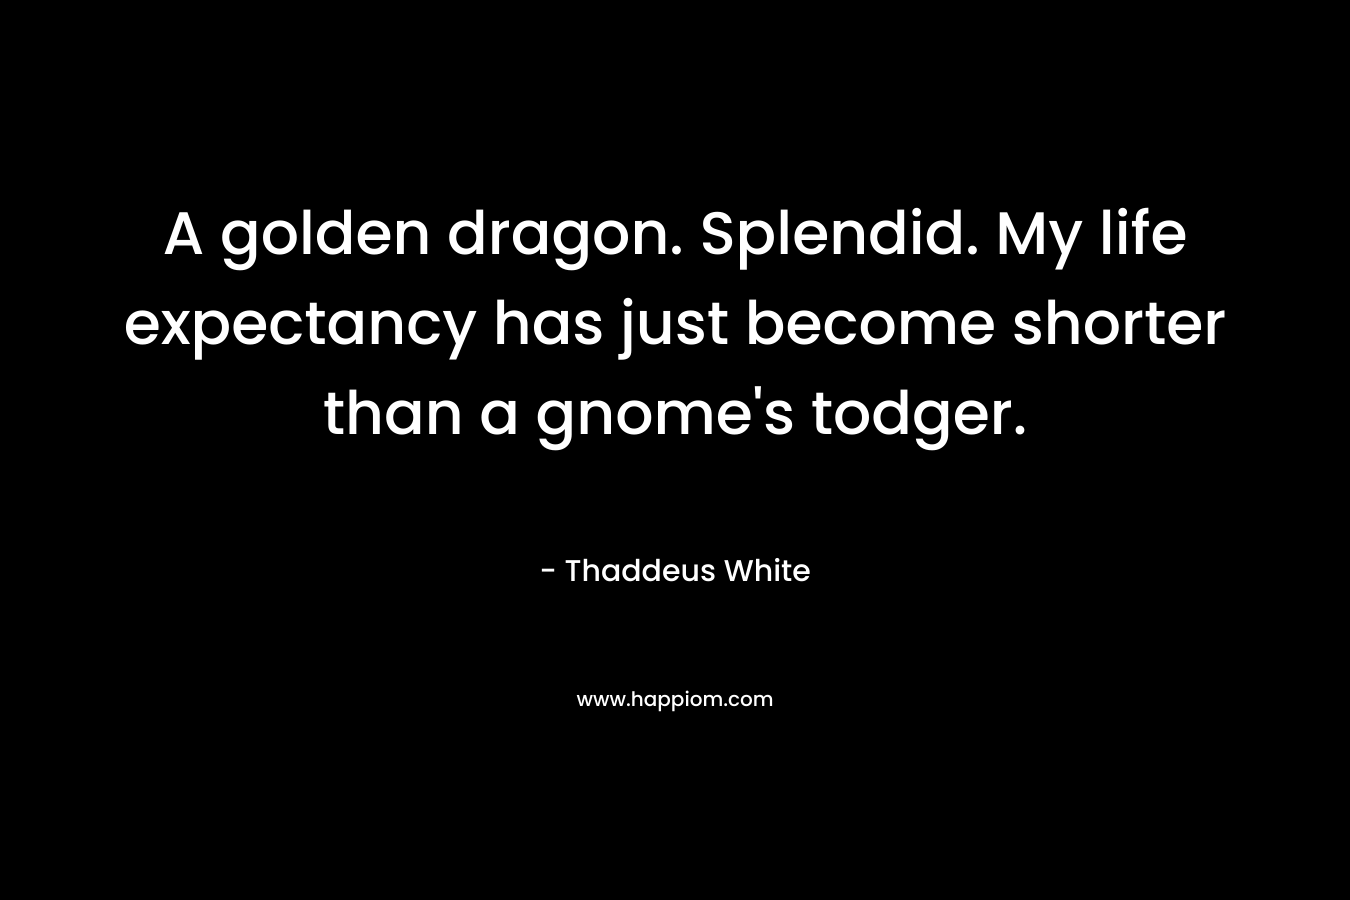 A golden dragon. Splendid. My life expectancy has just become shorter than a gnome's todger.